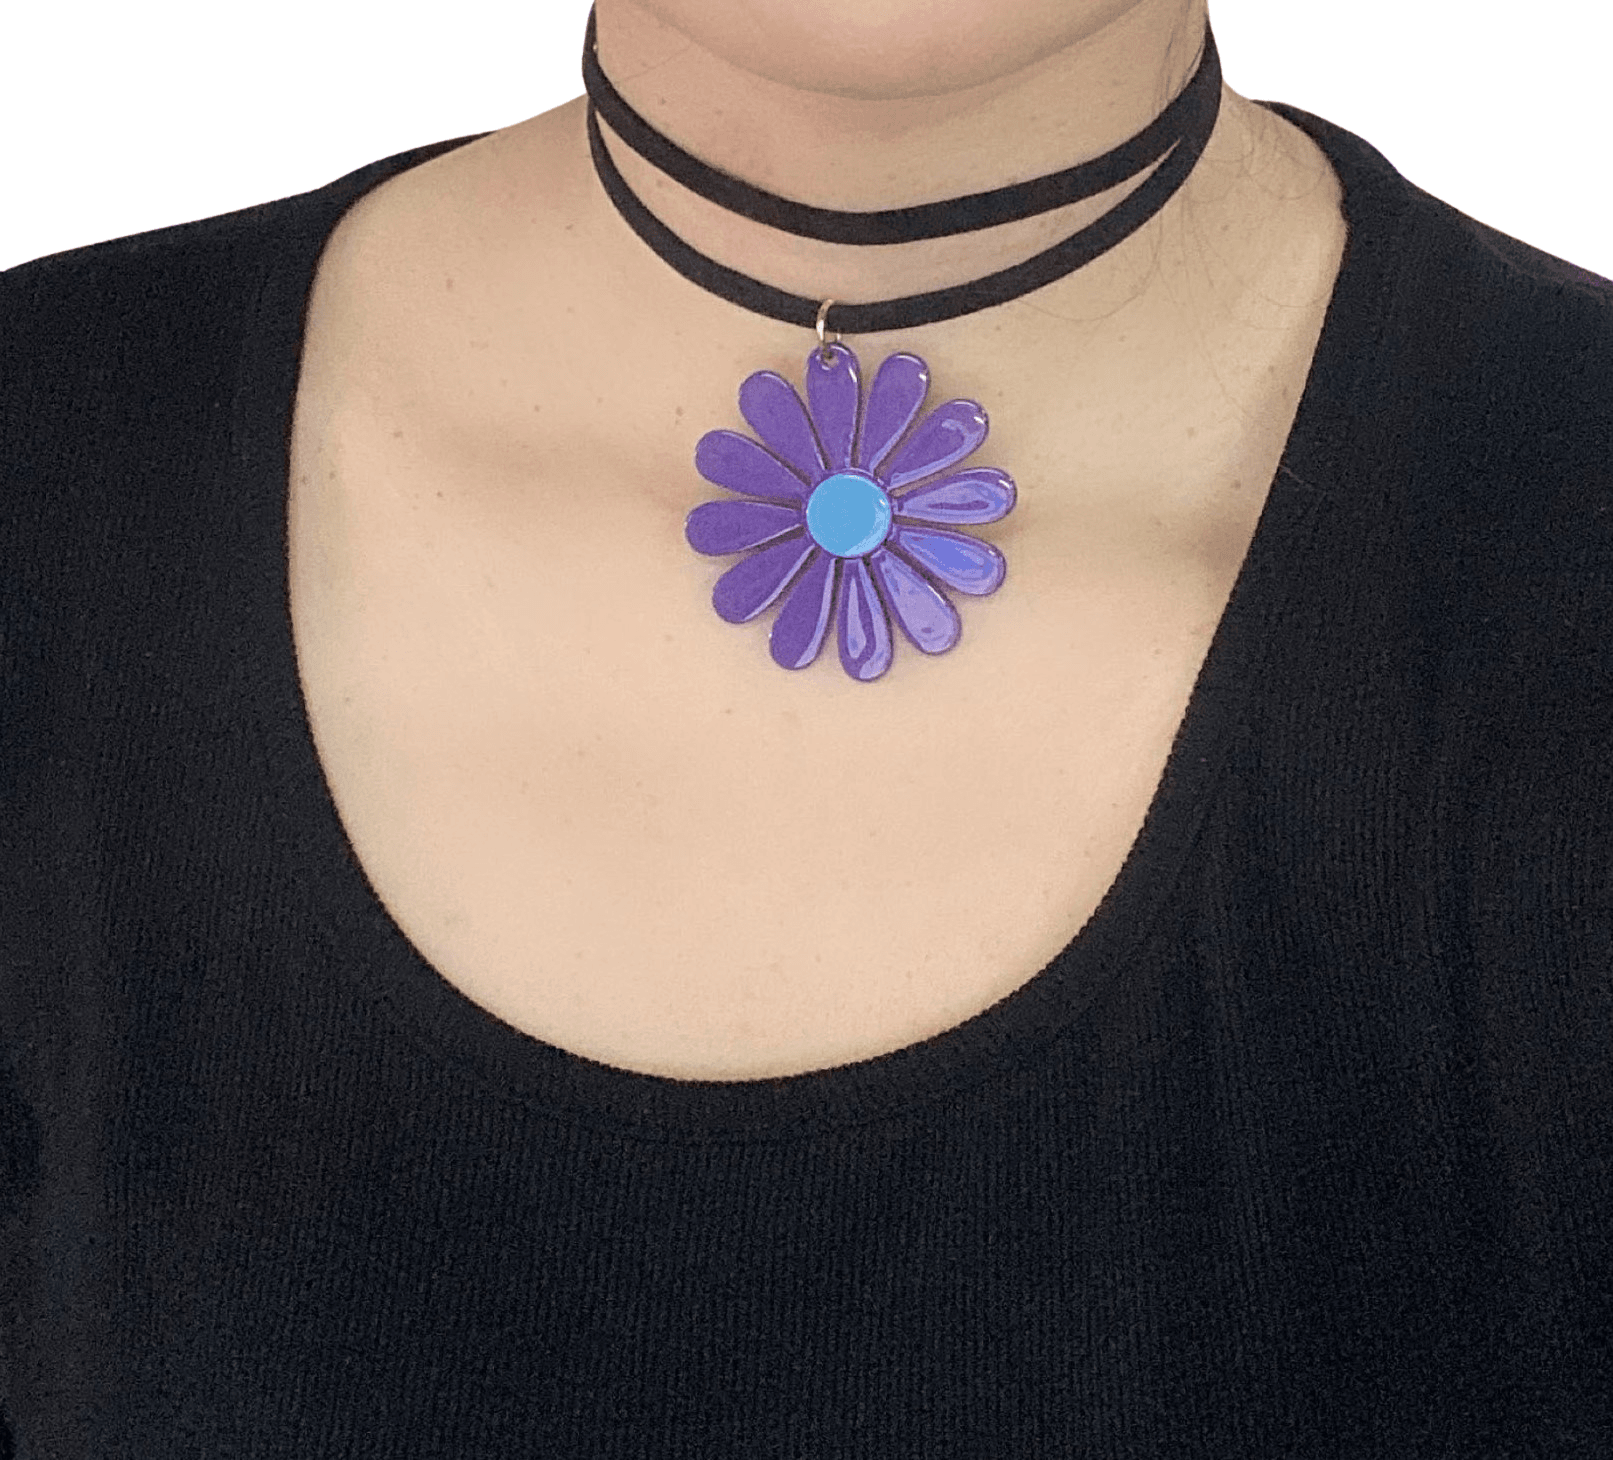 60s Flower Power Purple and Blue Choker Necklace Groovy Girl - Relic828